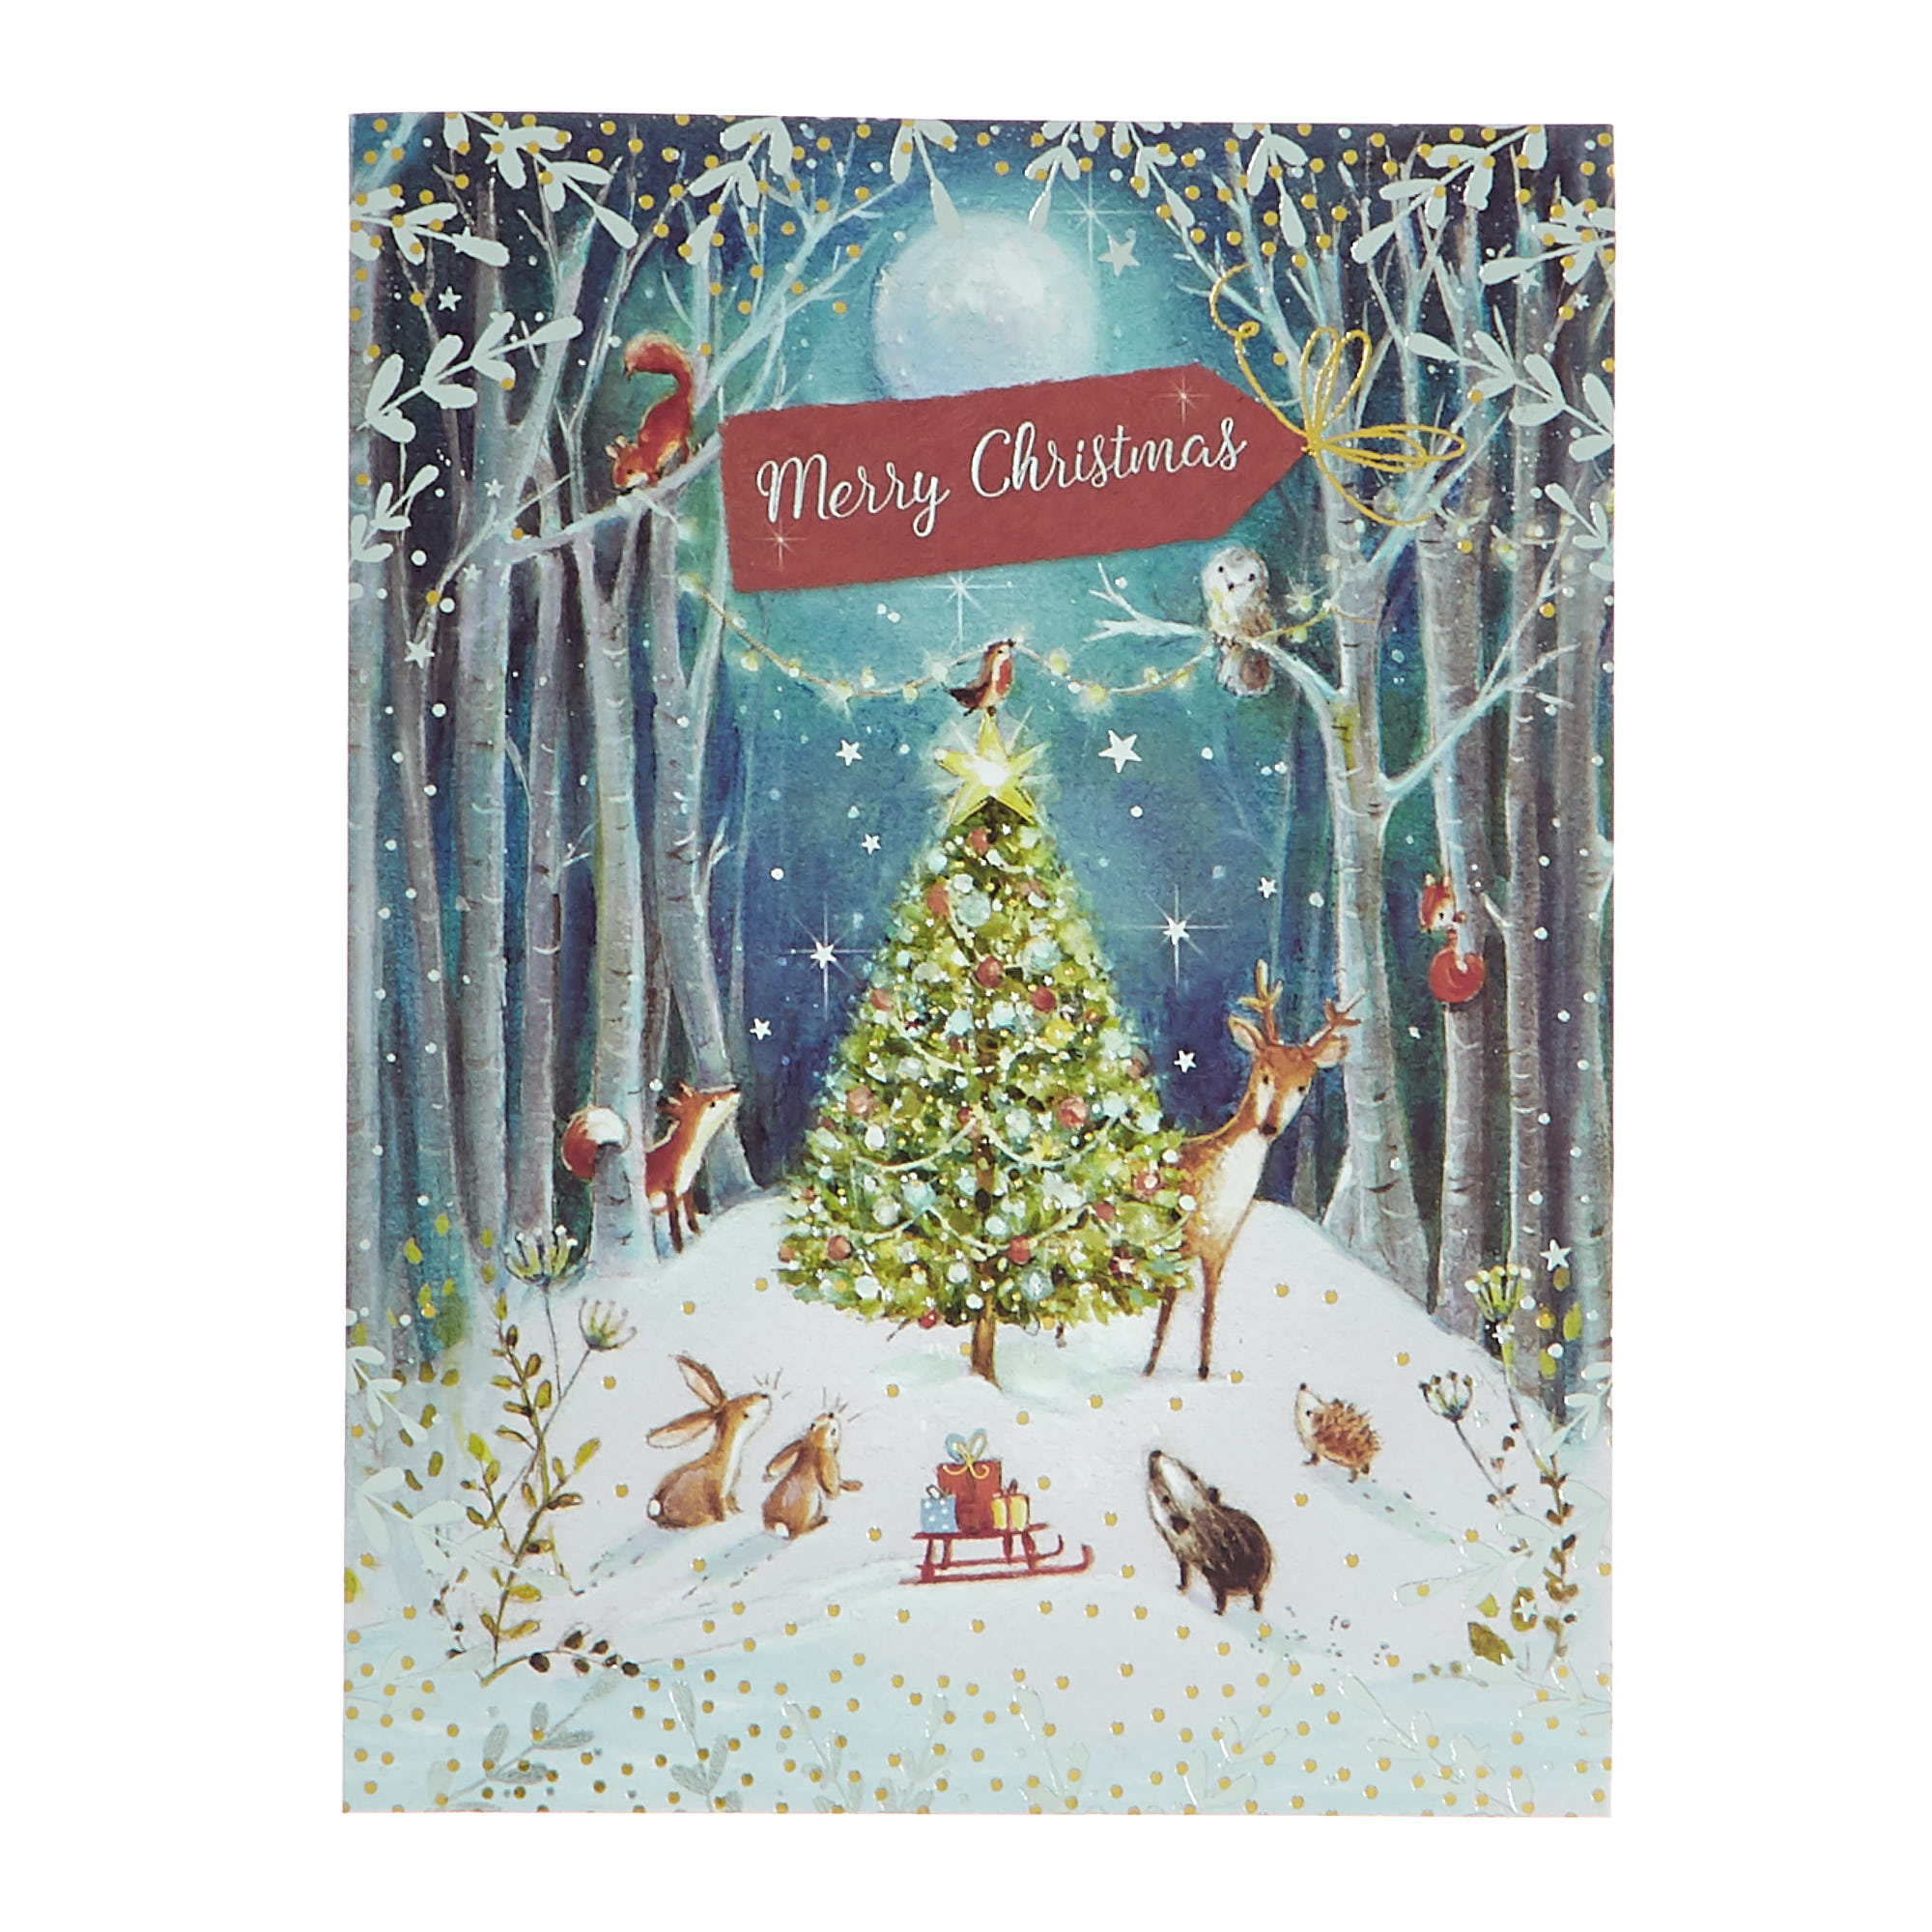 Buy 10 Deluxe Charity Boxed Christmas Cards - Festive Woodland (2 ...